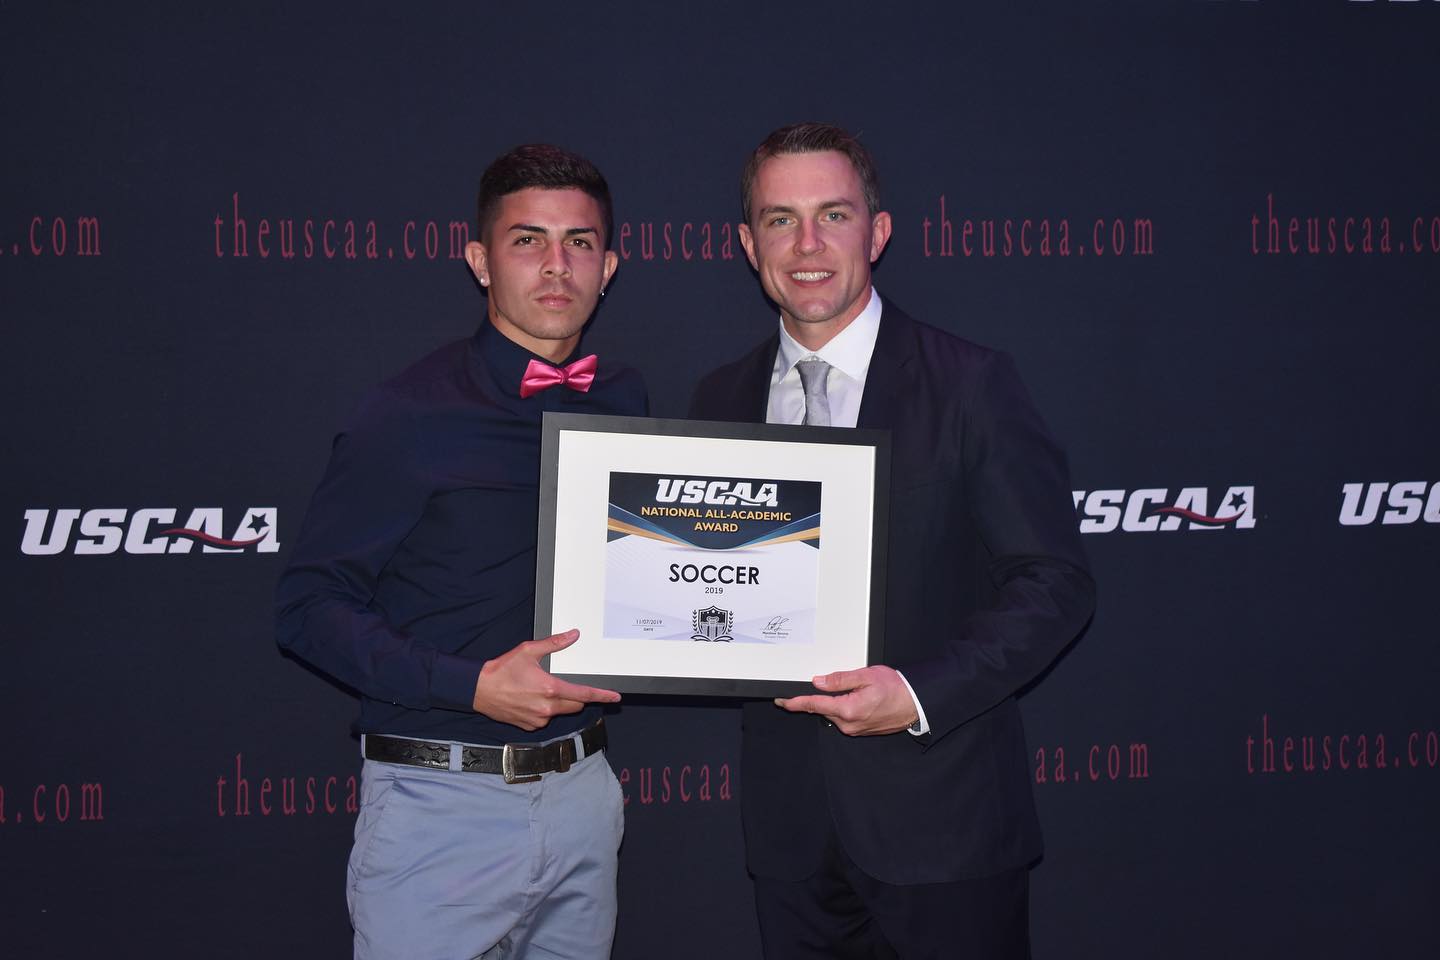 men's soccer player George Perez receiving the USCAA All-Academic Award